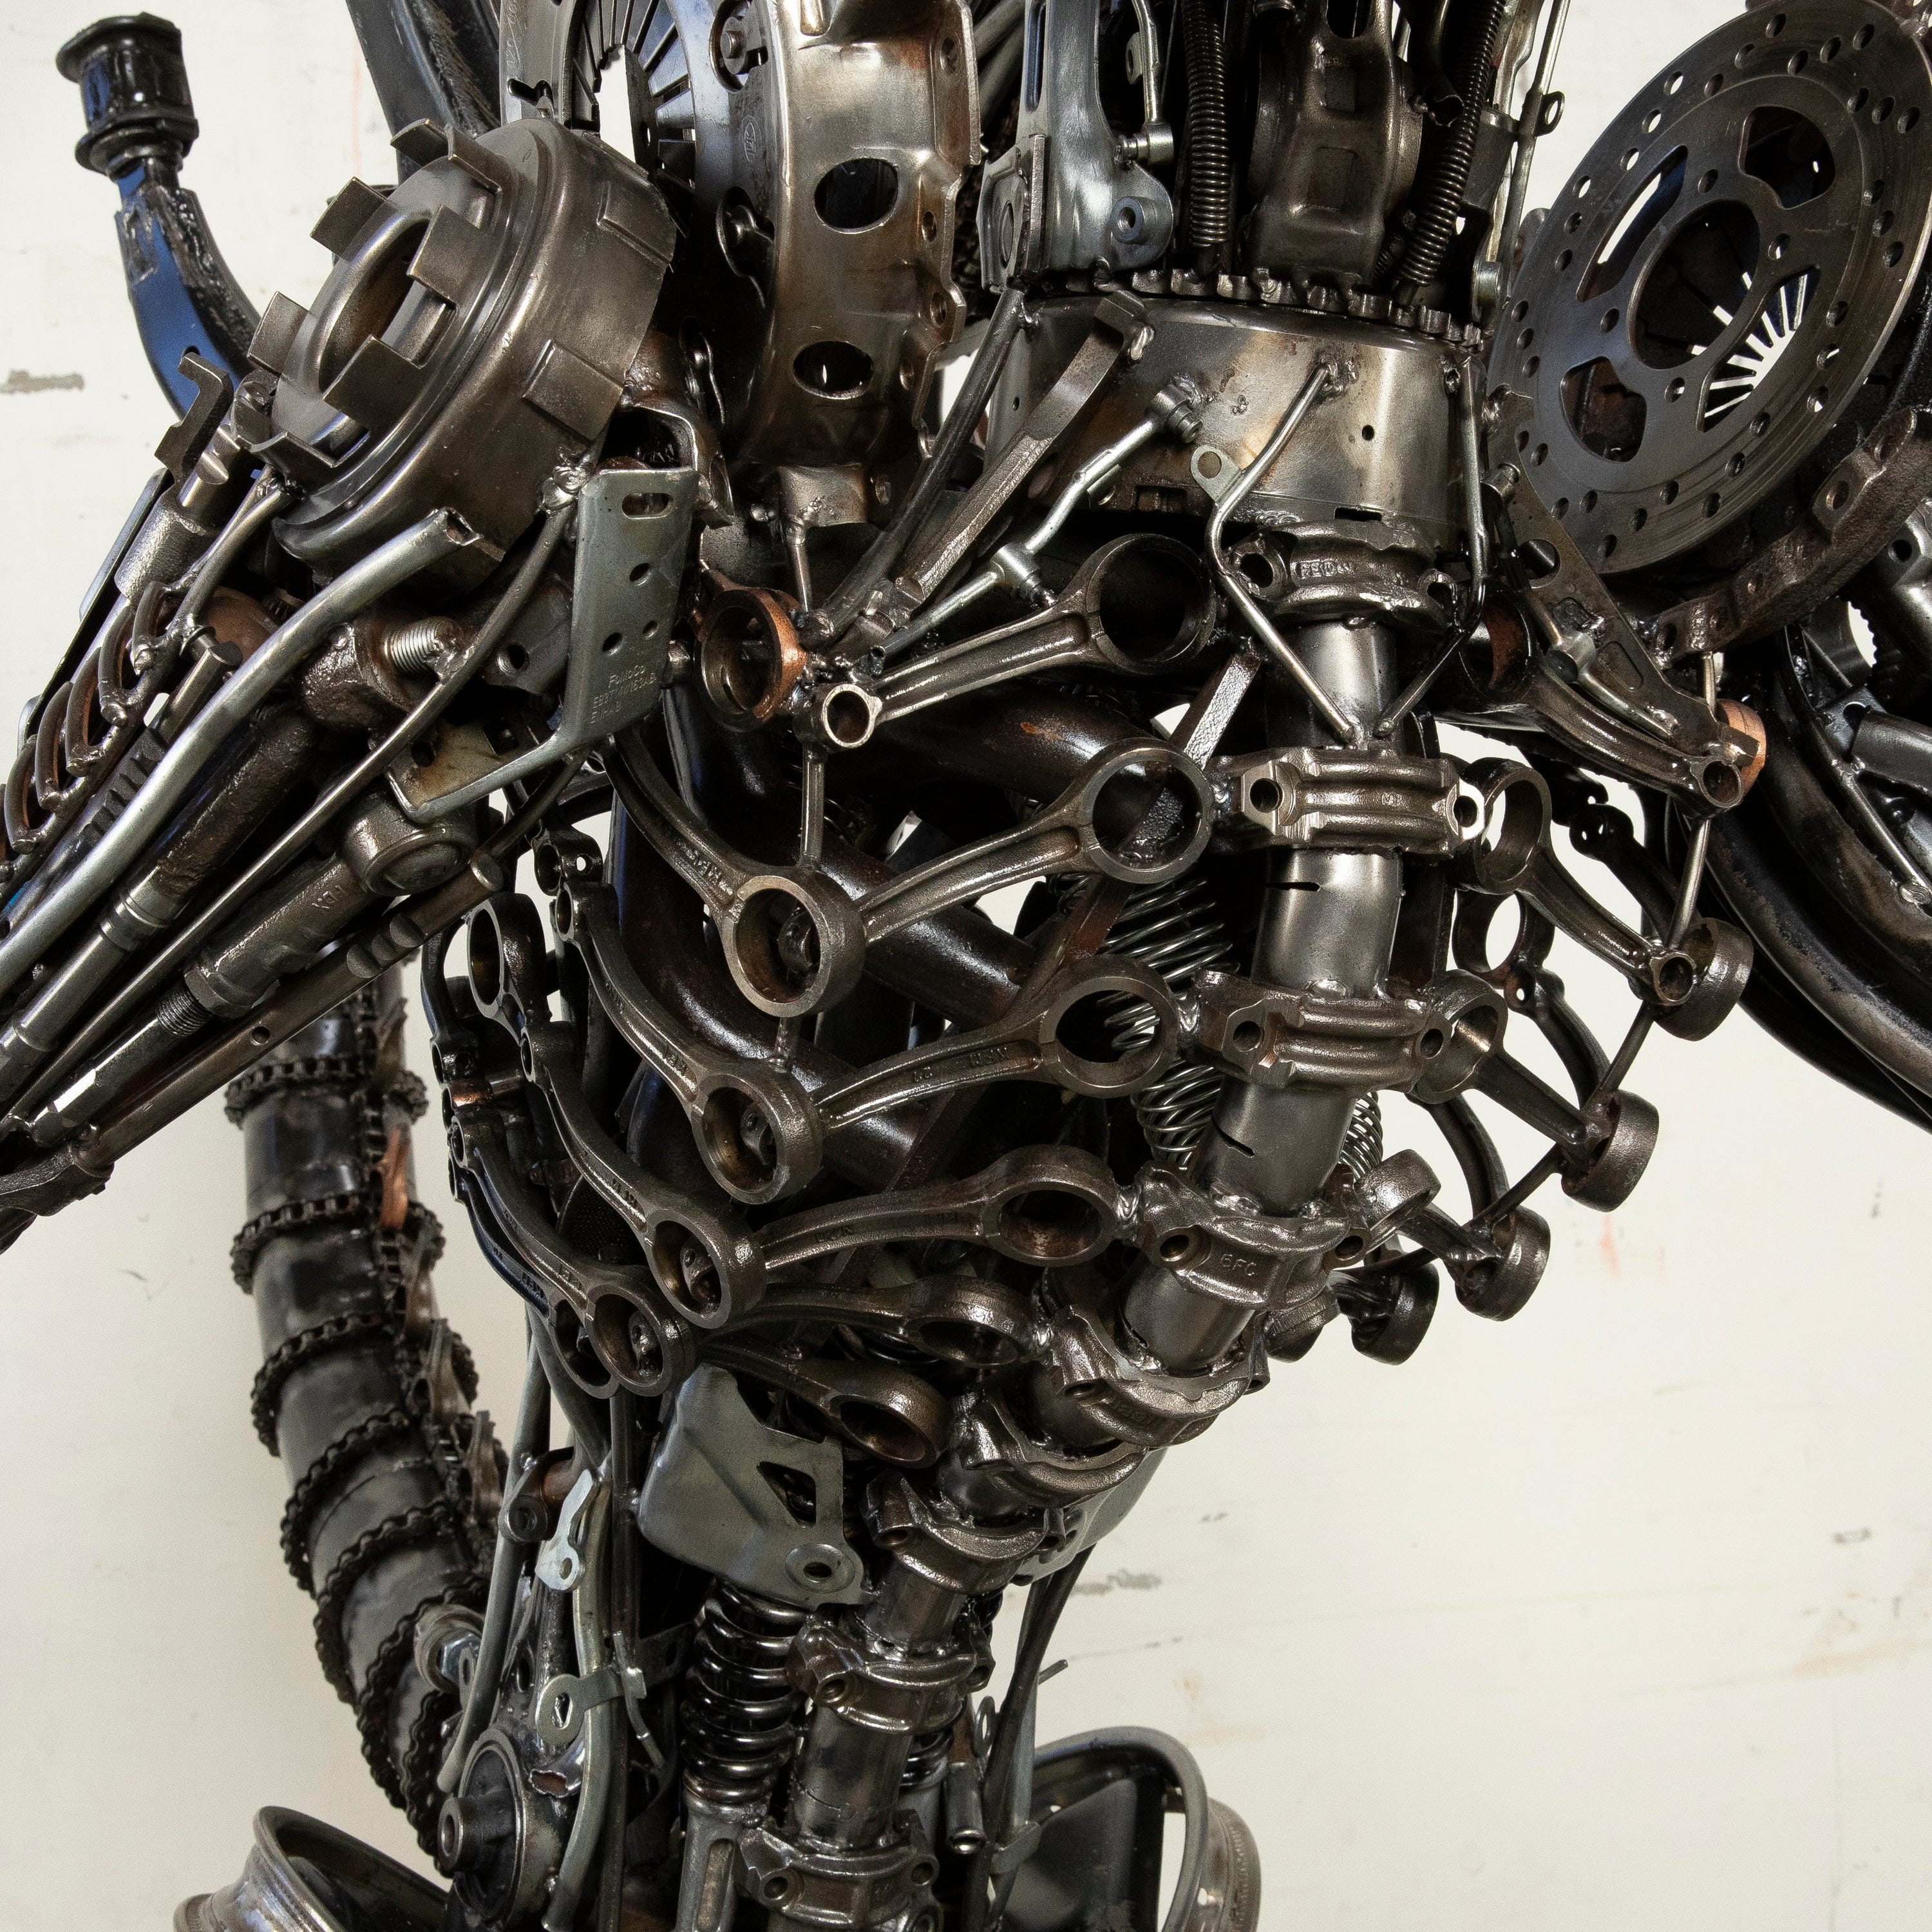 Kalifano Recycled Metal Art 79" Alien Inspired Recycled Metal Art Sculpture RMS-A200-S03